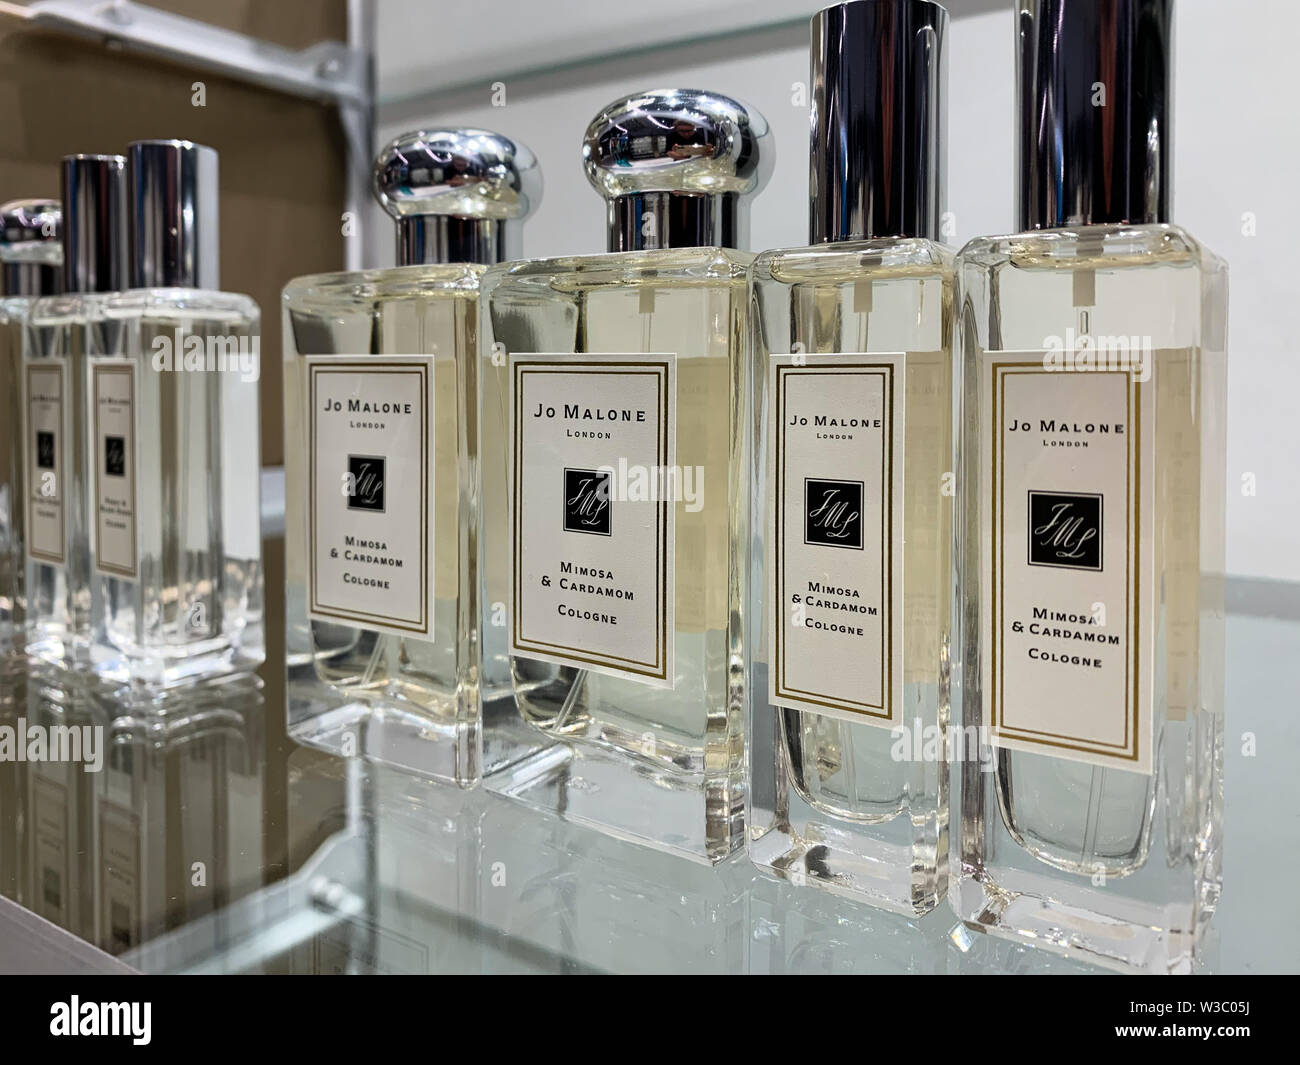 Jo Malone perfumes on display on a shop. Jo Malone London is a British perfume and scented candle brand, founded by Jo Malone in 1983. Rare niche Stock Photo